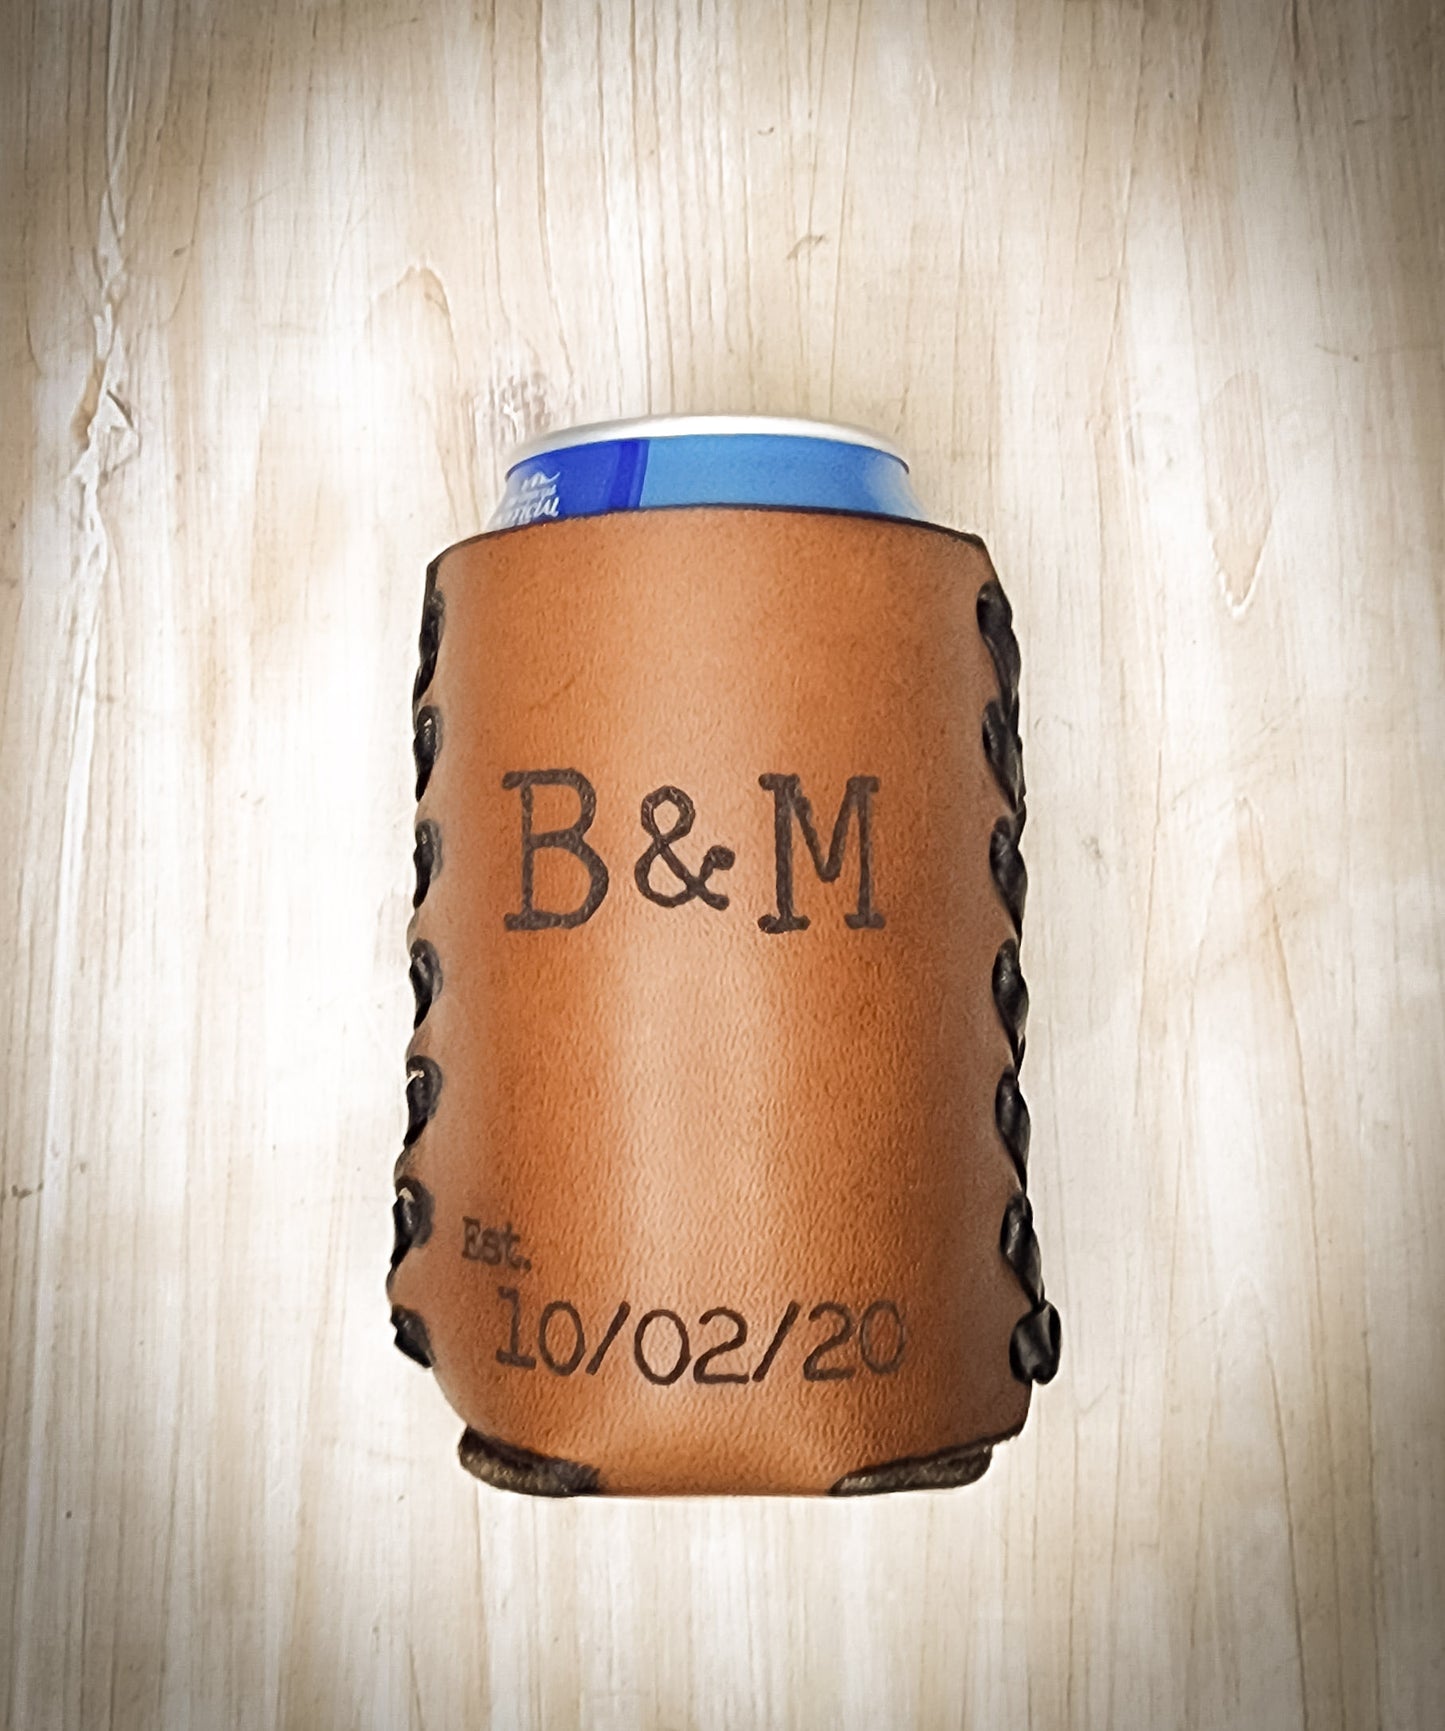 Premium Personalized Leather Drink Cozie for Men – Hand-Laced Craftsmanship | Ideal Gift for Him and Any Occasion!